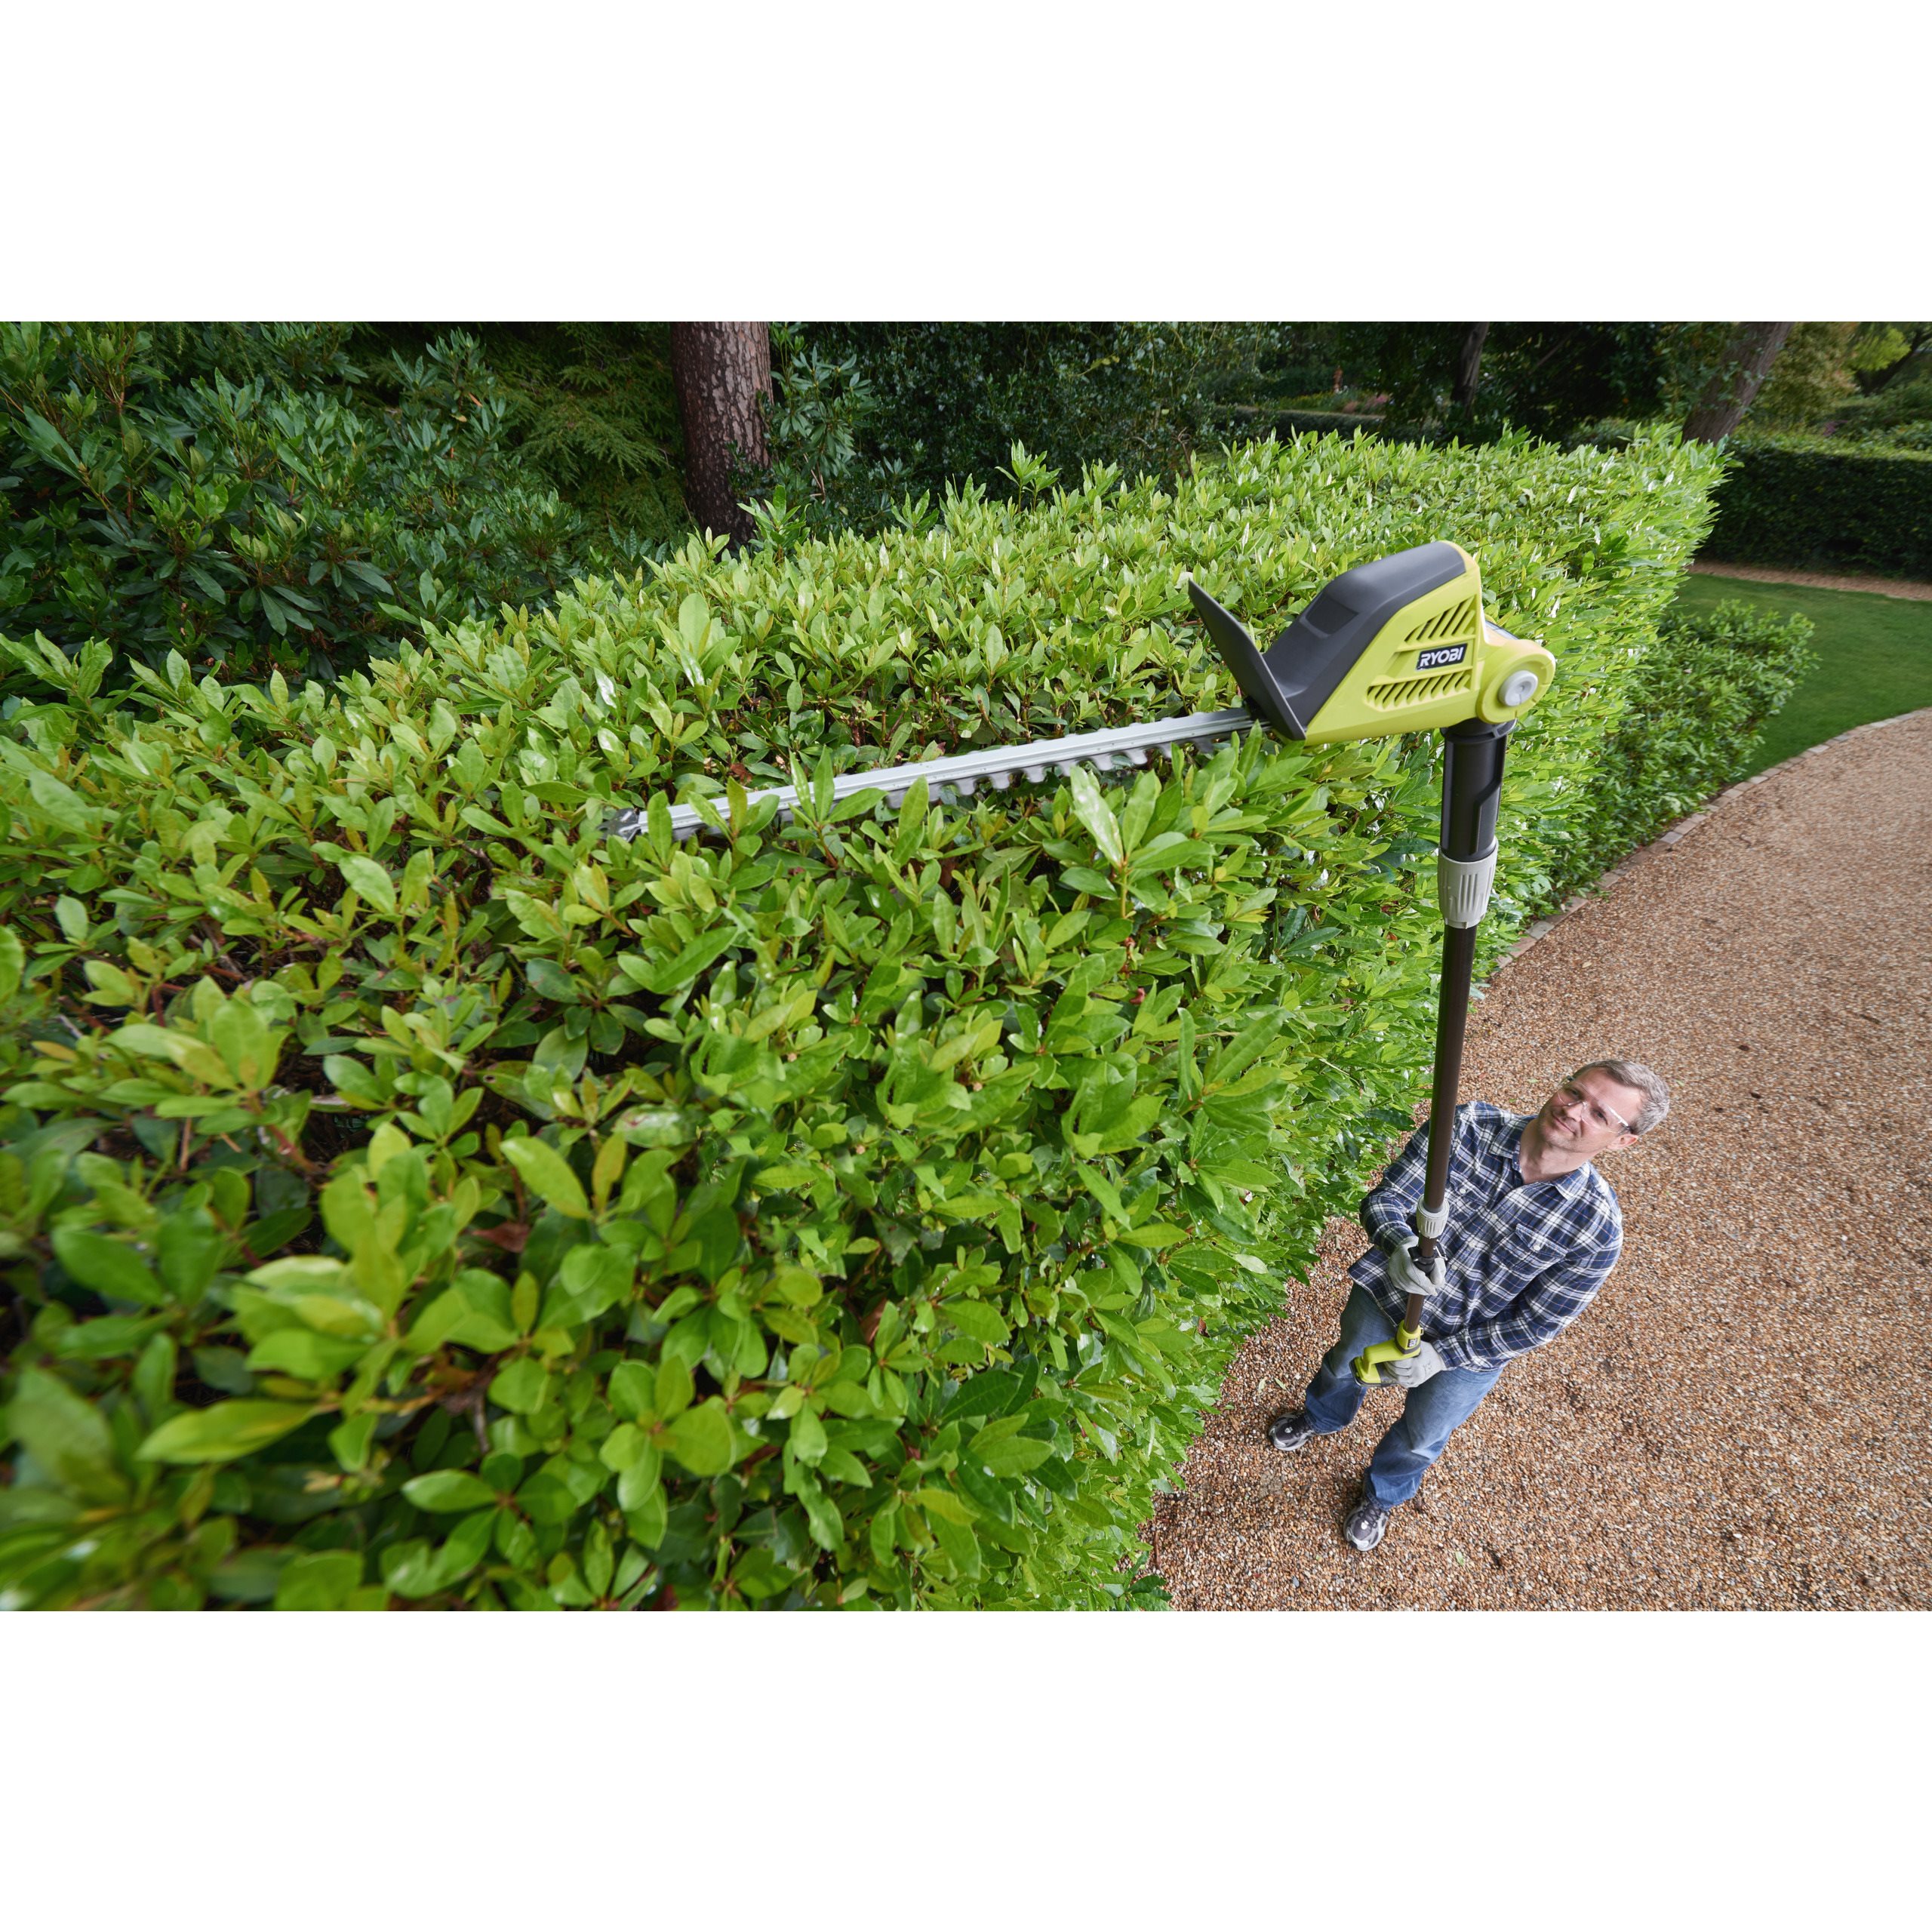 Body only & RC18120 18V ONE+ Compact Charger 20cm Bar Ryobi ONE+ 18V OPP1820 Cordless Pole Pruner 